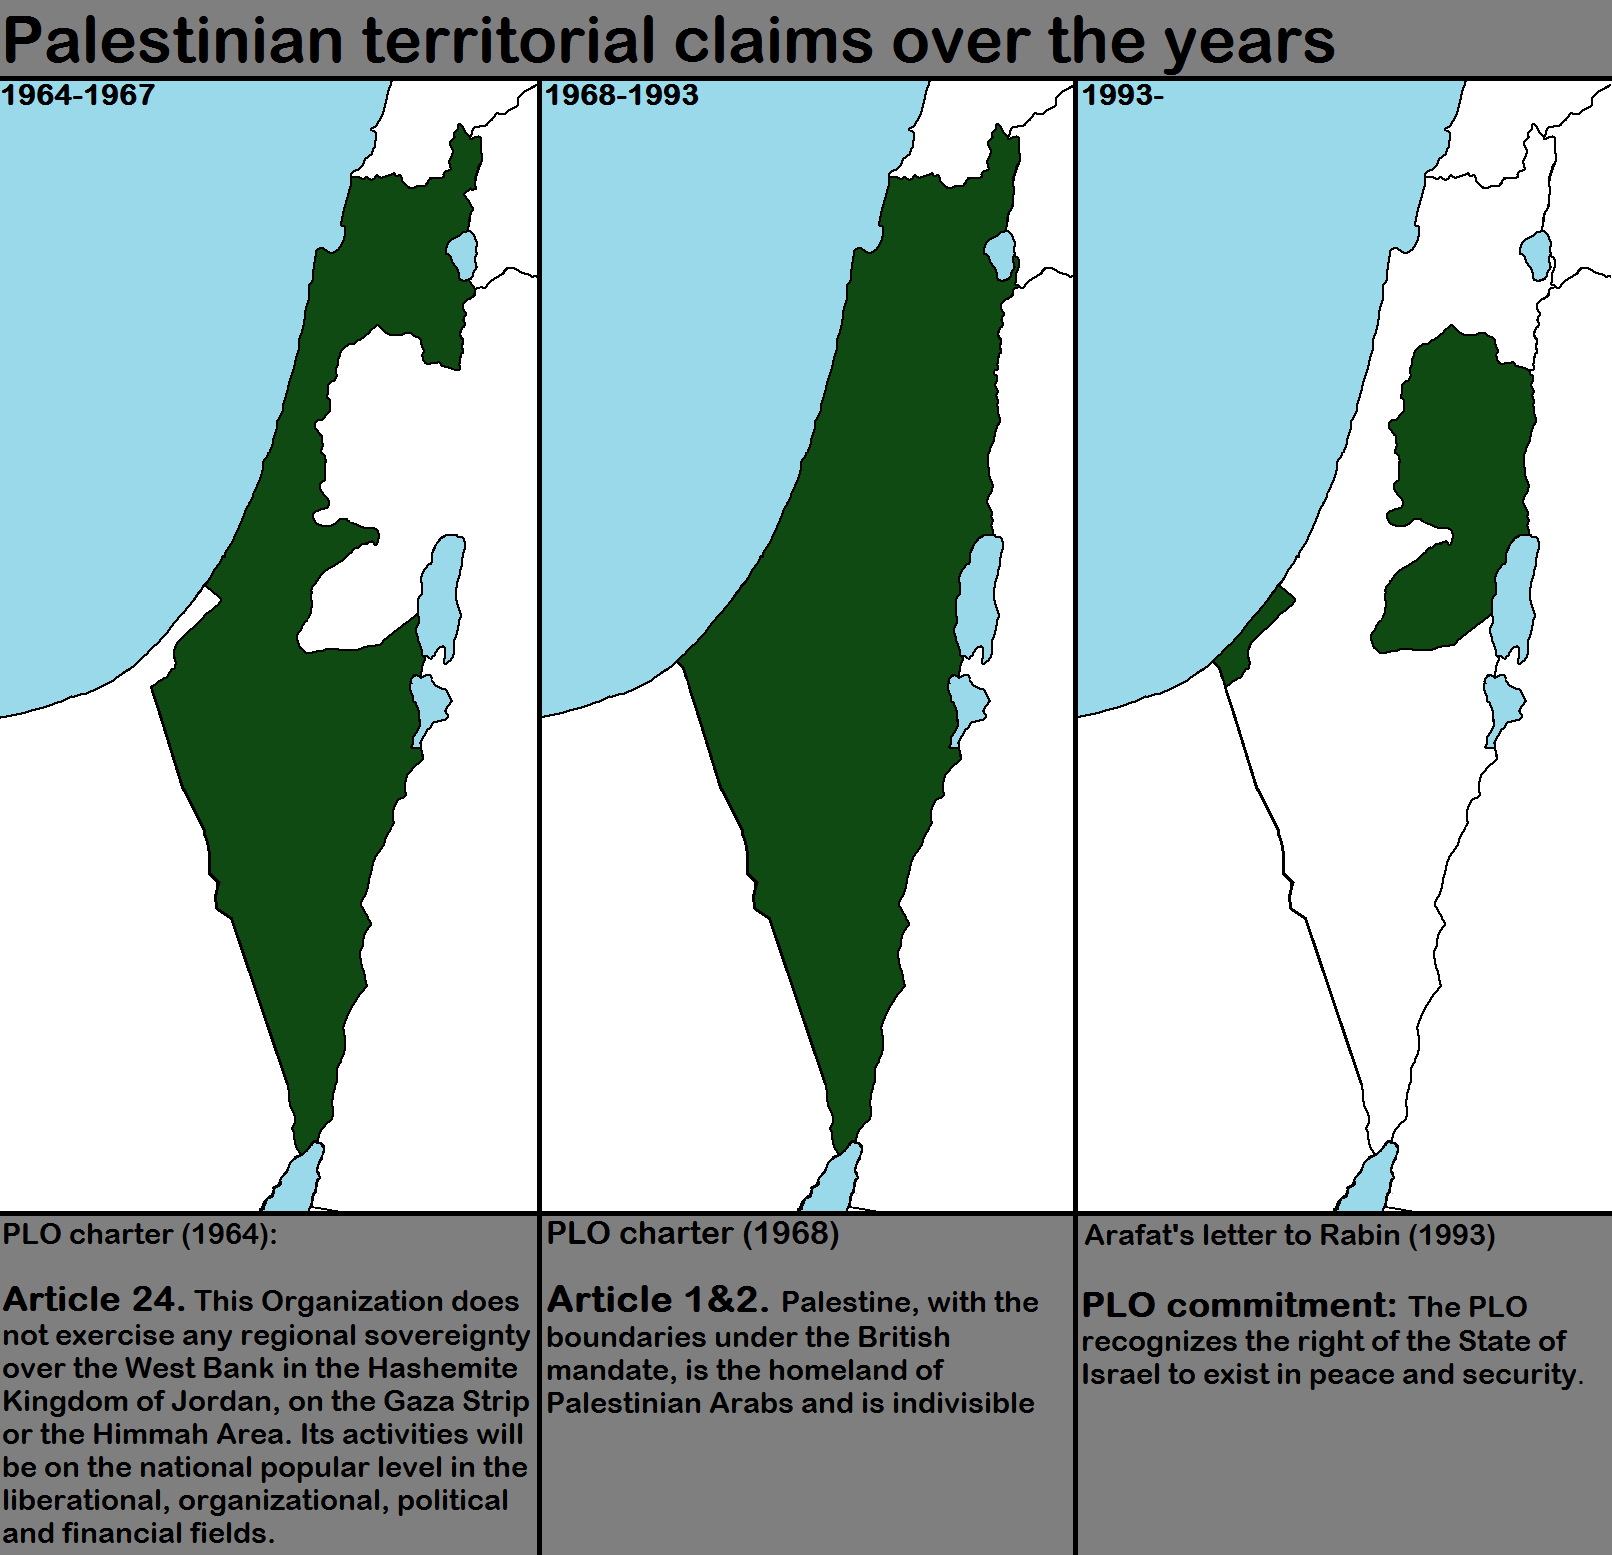 Palestinian territorial claims tactic by bolter21 on DeviantArt